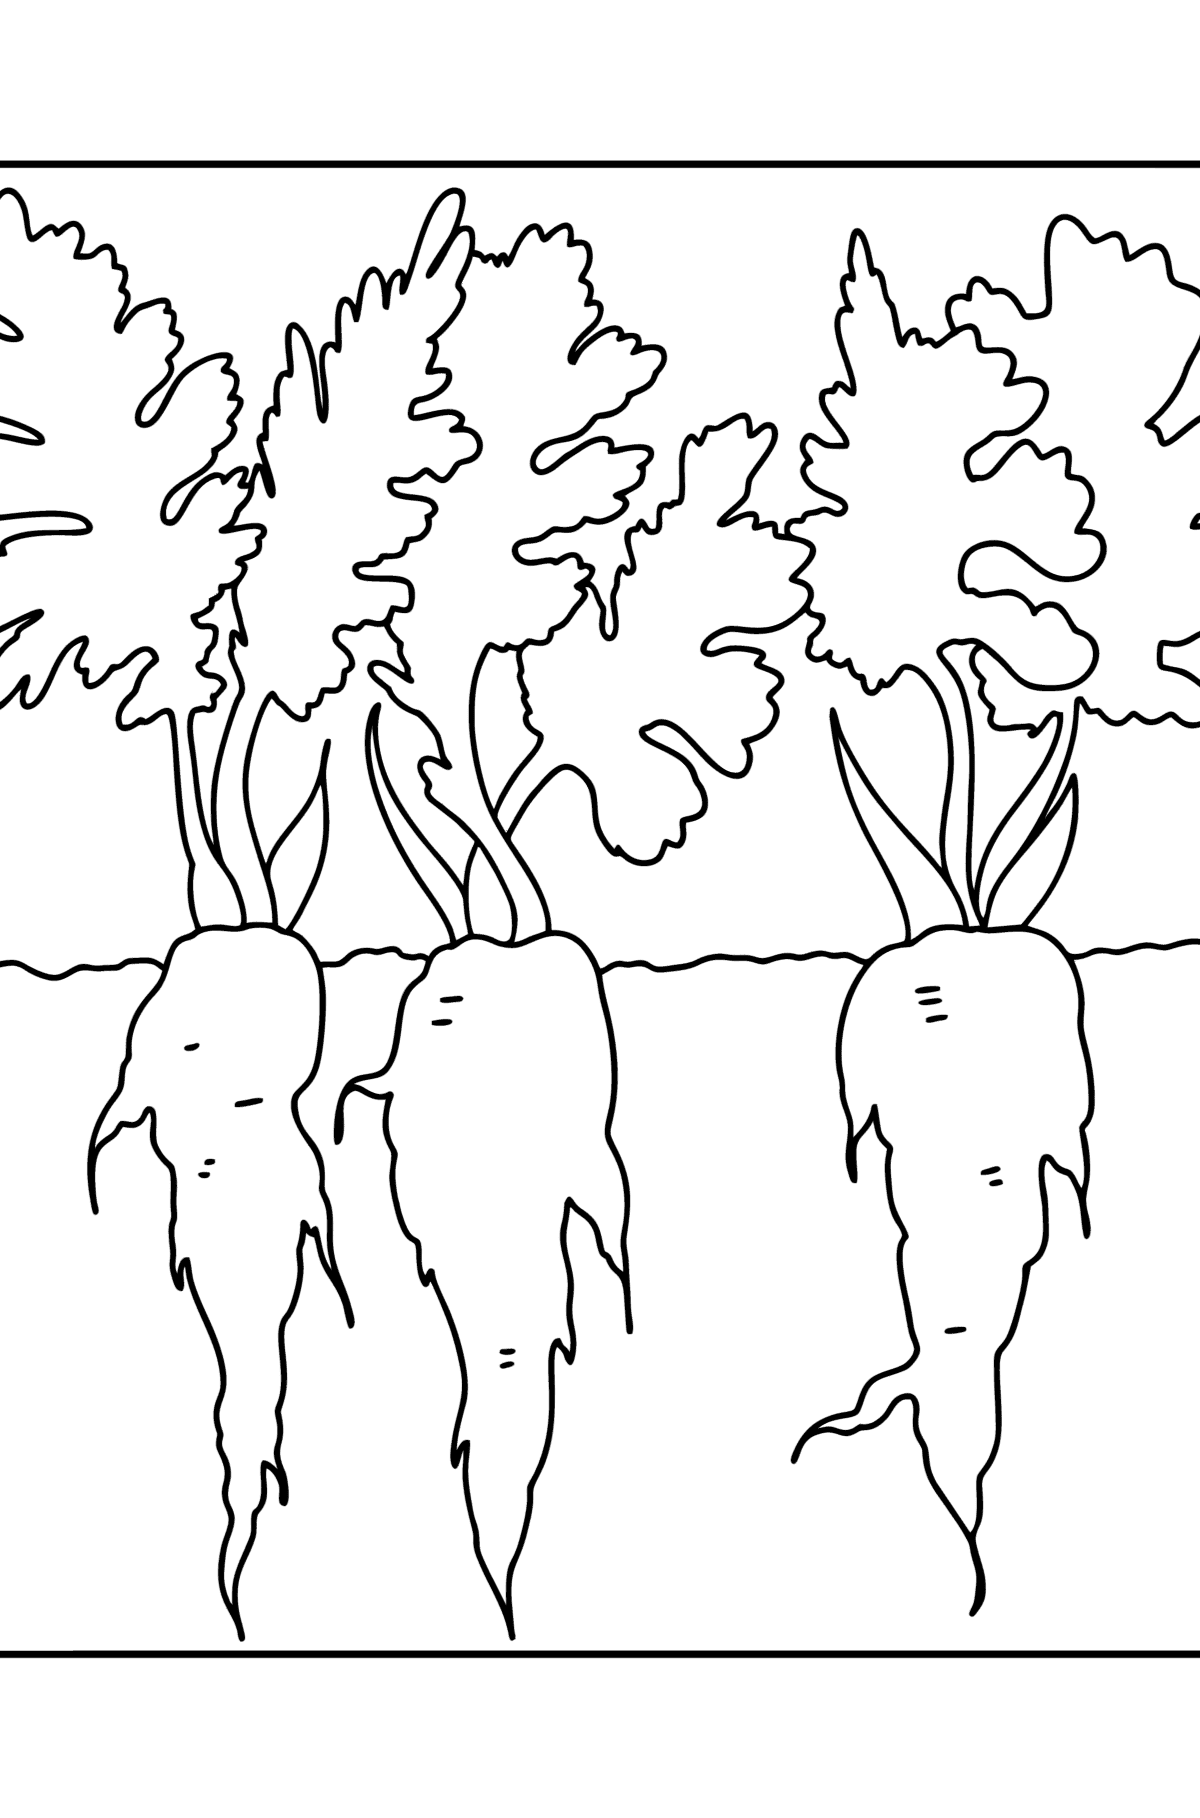 Carrot grows сoloring page - Coloring Pages for Kids